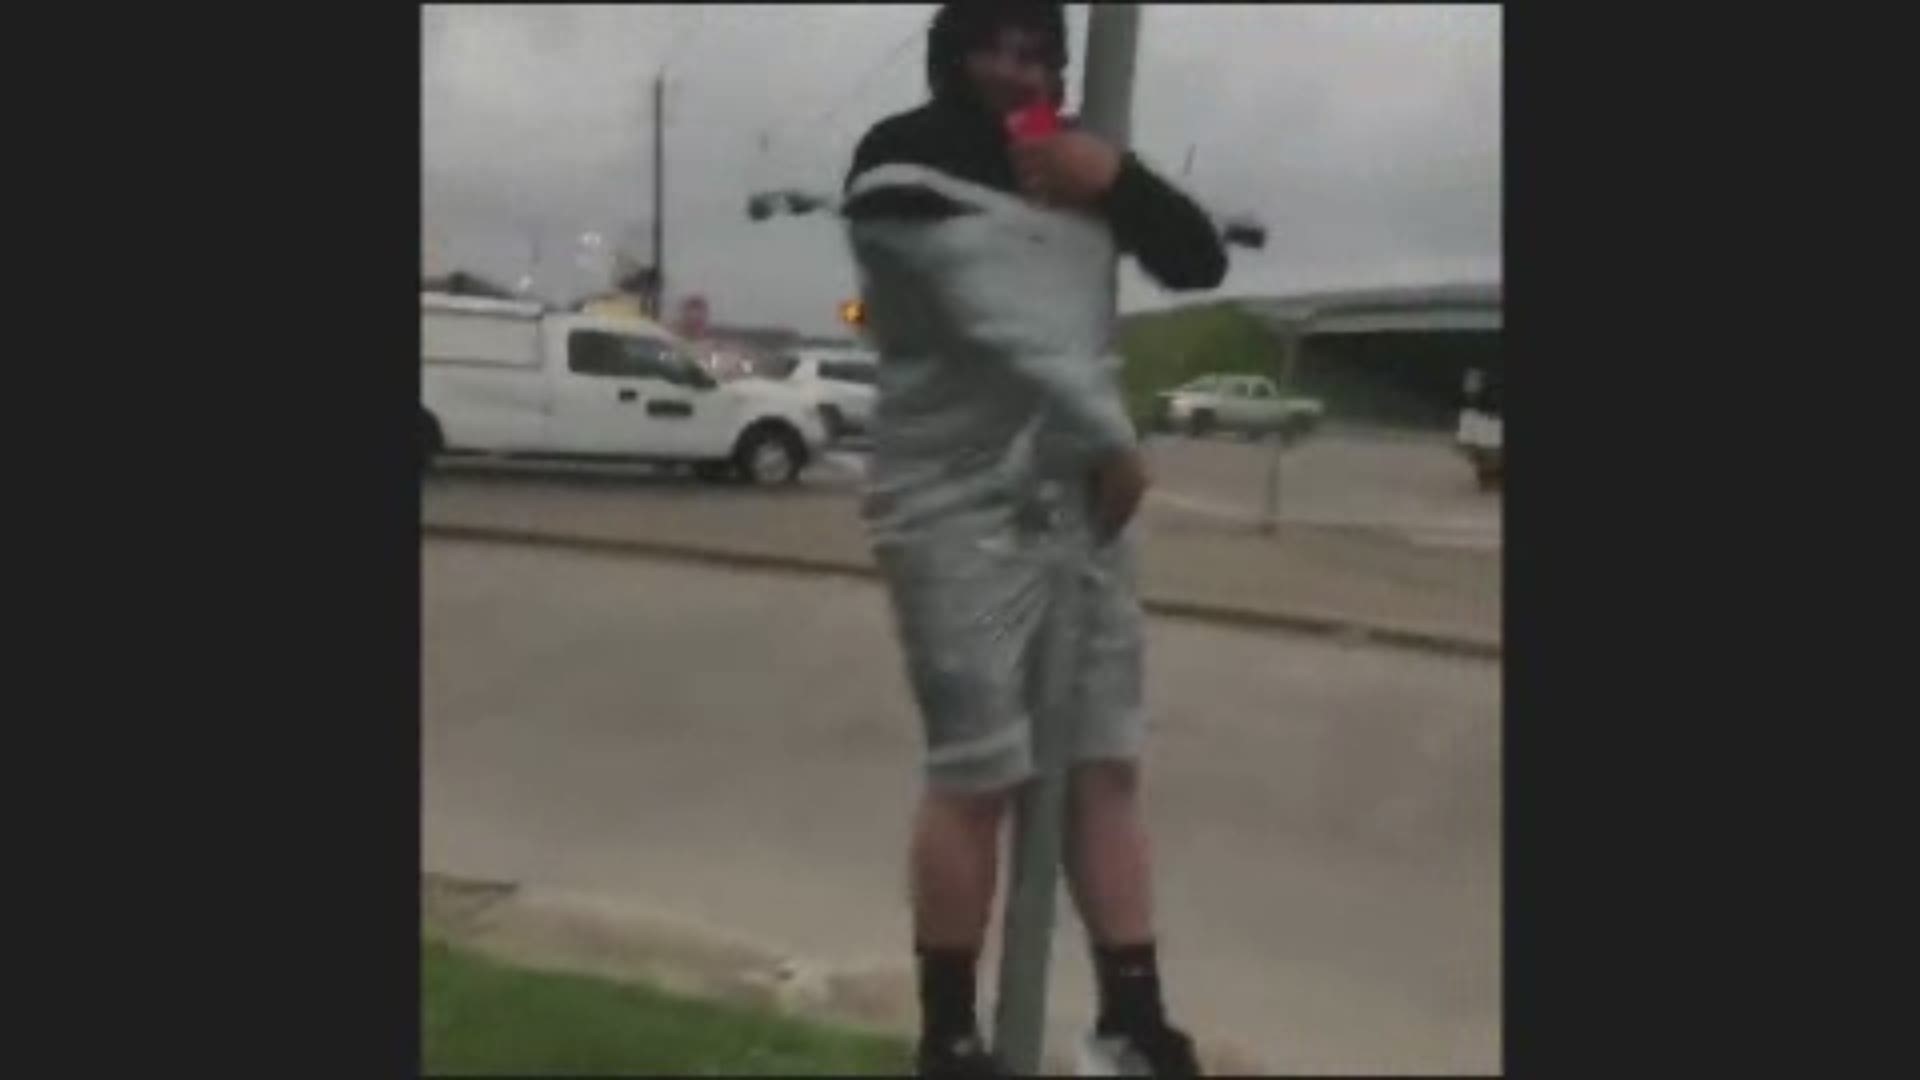 Drivers in northeast Houston were doing double takes Wednesday when they spotted some poor guy duct-taped to a yield sign. Somebody called the cops and they pulled up just in time to see a guy with a knife approach the man.